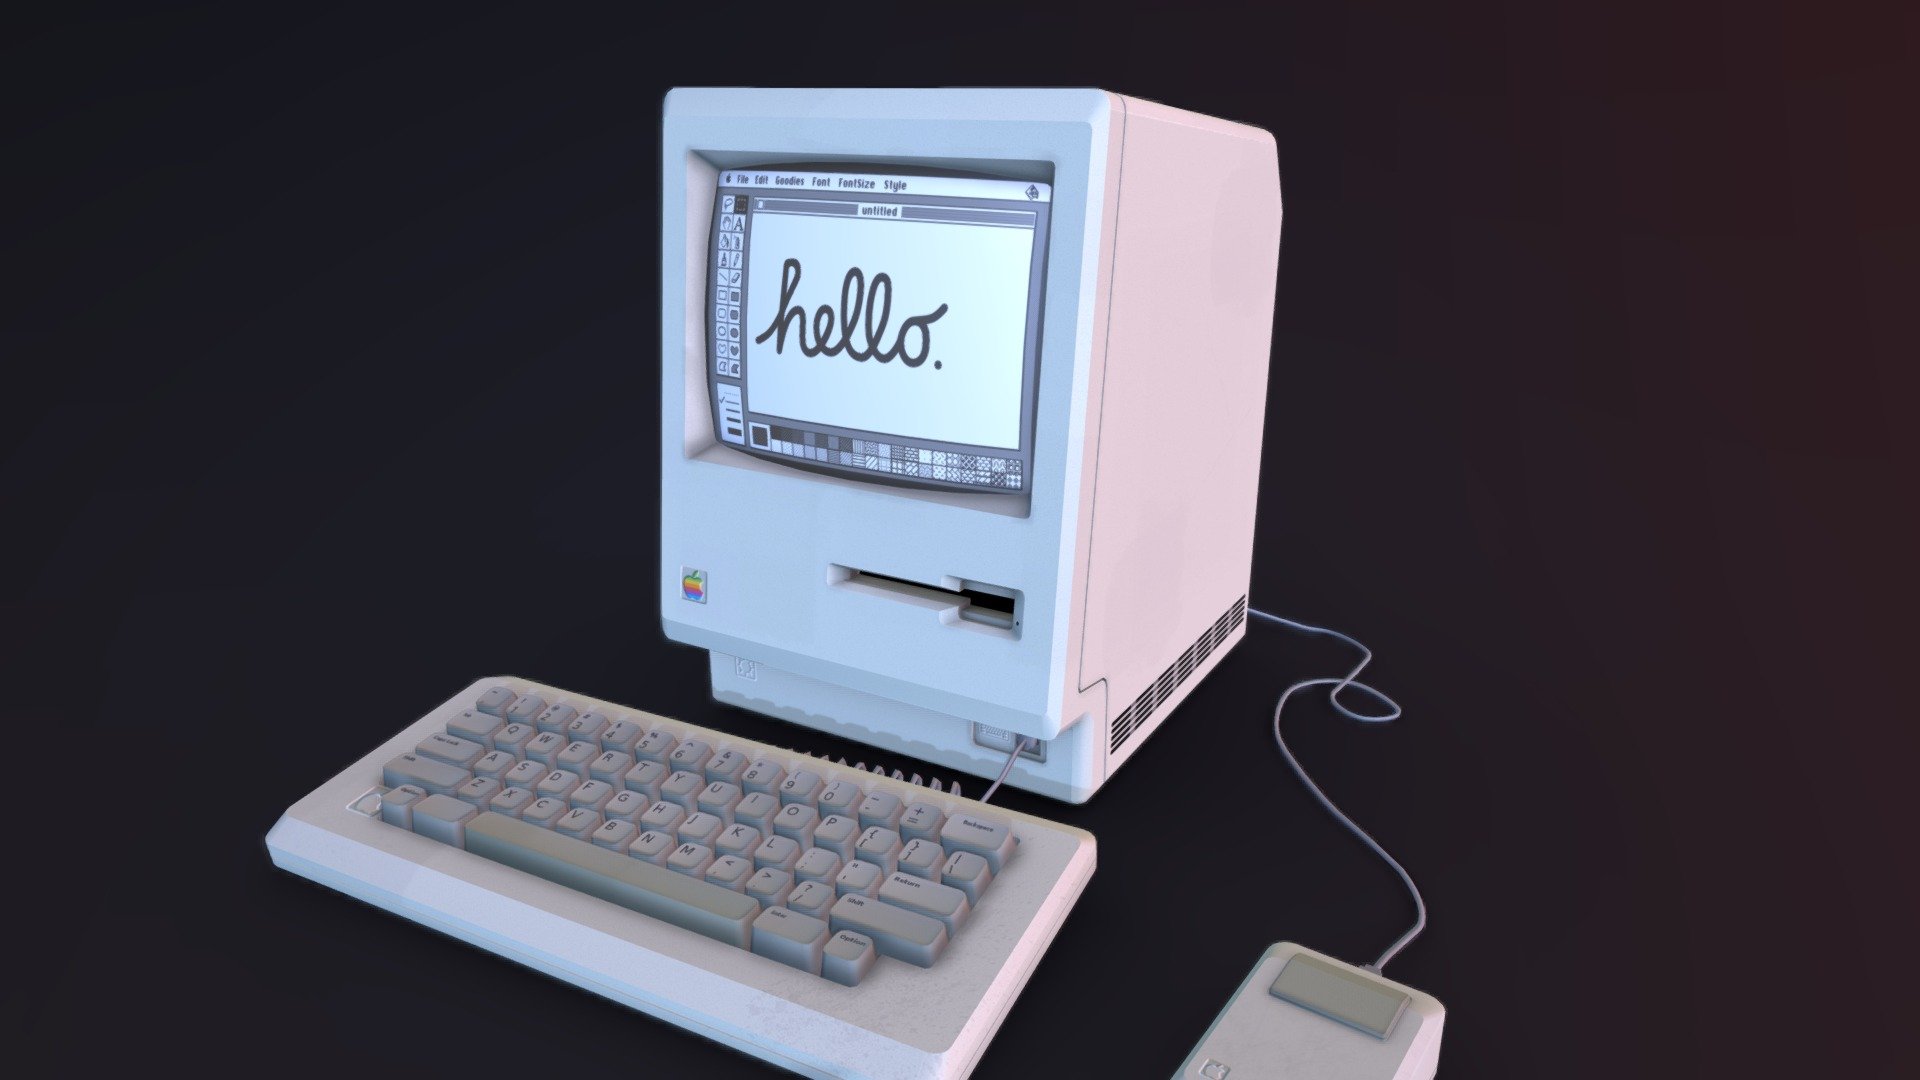 Made for SFM. 
http://steamcommunity.com/sharedfiles/filedetails/?id=1152523988 - Macintosh 128k - 3D model by Unconid 3d model